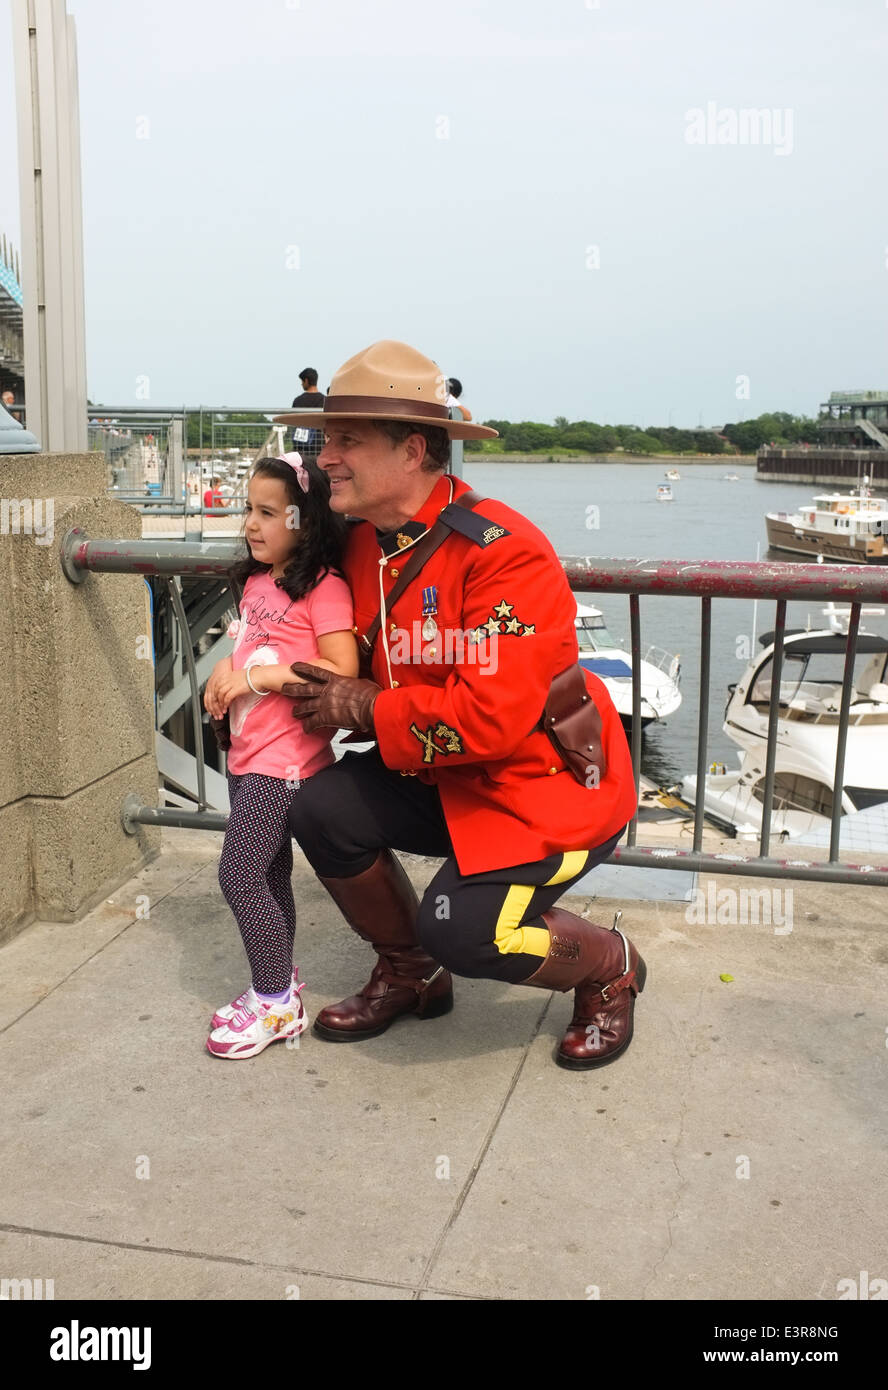 A young child has her photo taken with an RCMP officer in uniform during Canada Day celebrations in the Old Port of Montreal, Qu Stock Photo